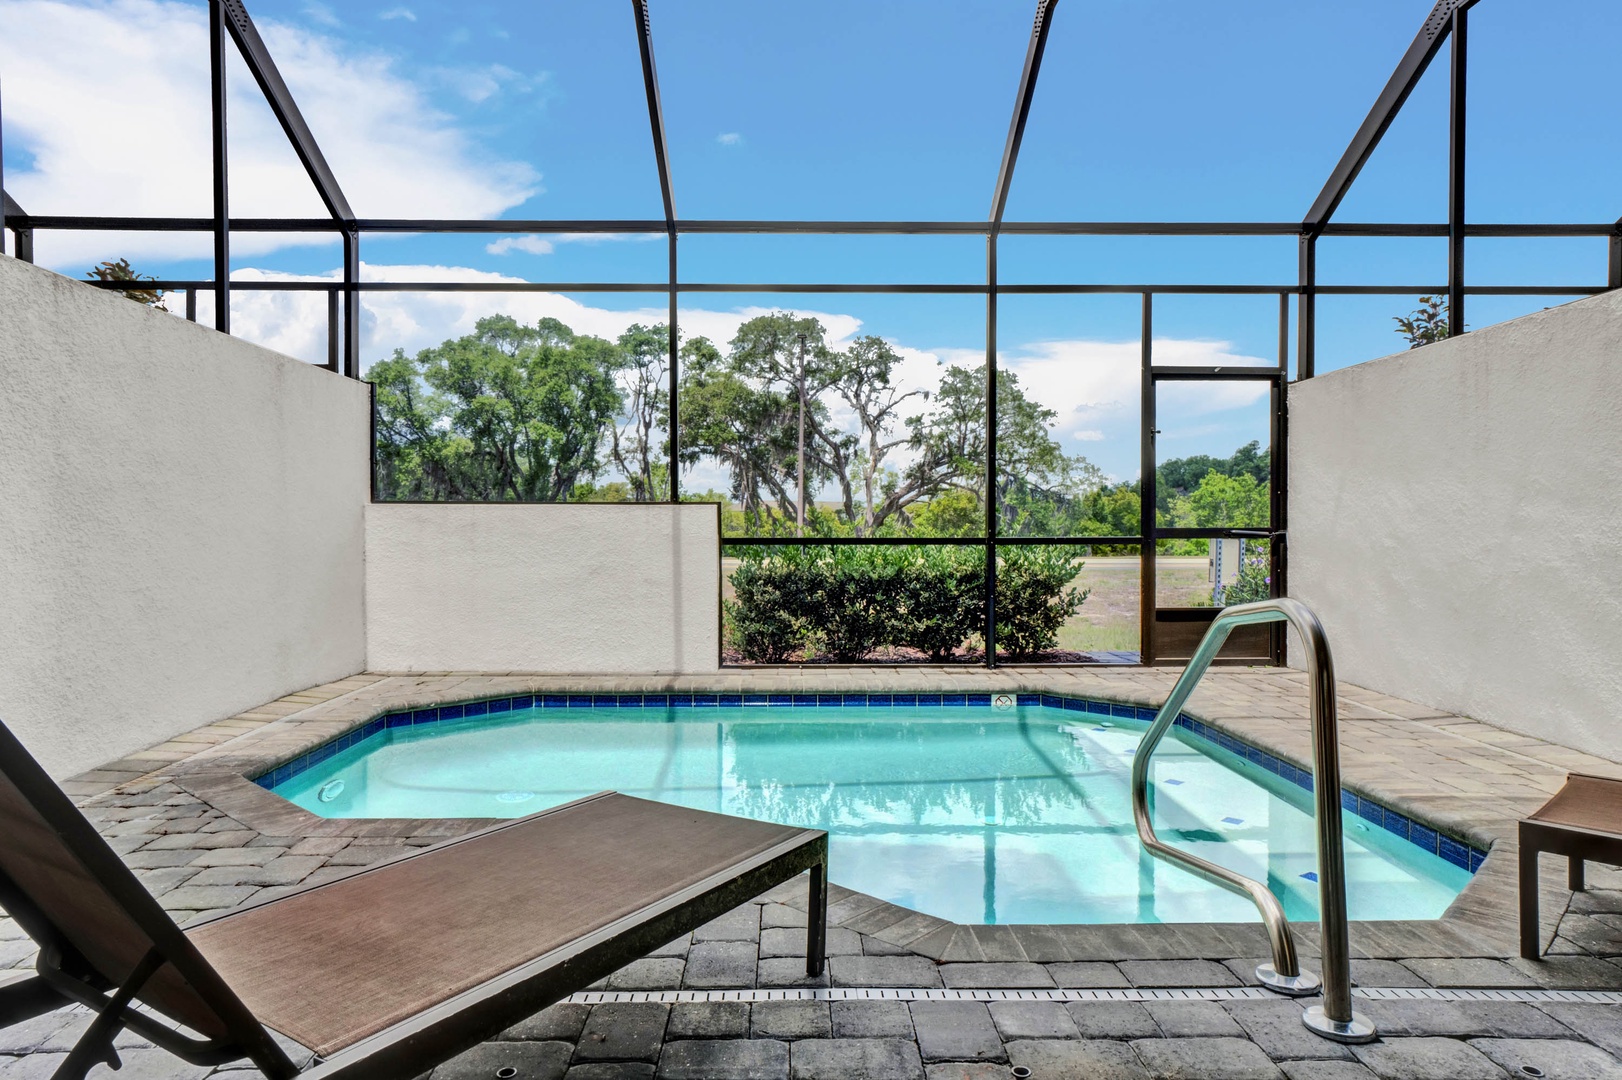 Private screened pool with outdoor seating